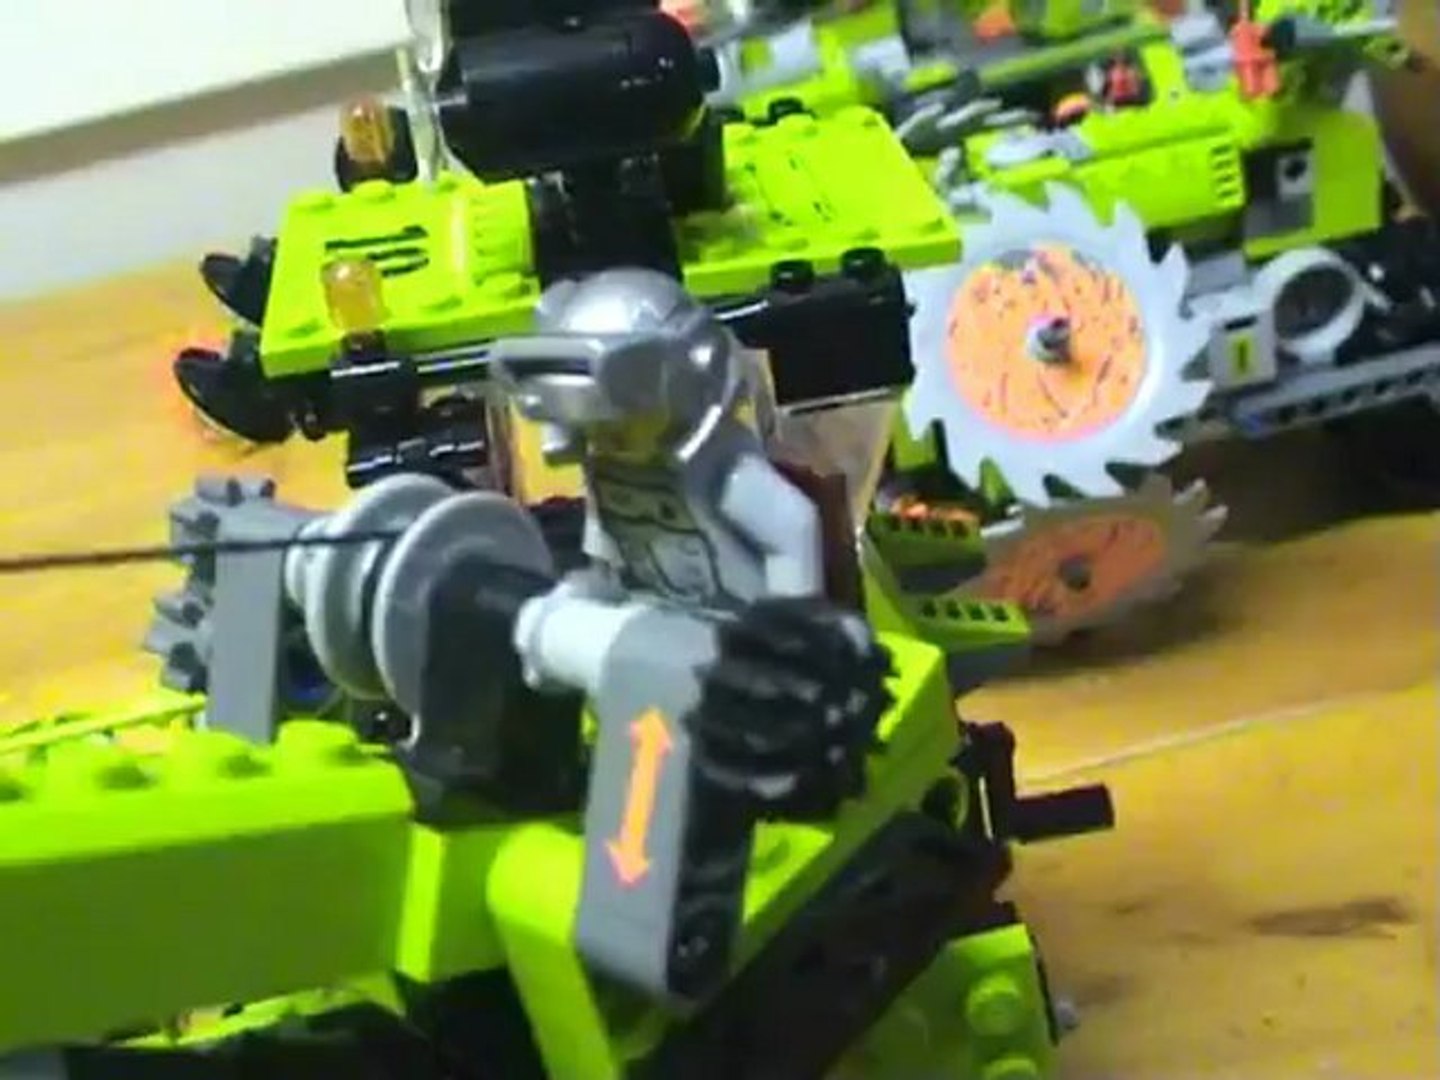 Lego Power Miners eaten by our cat Luke - video Dailymotion